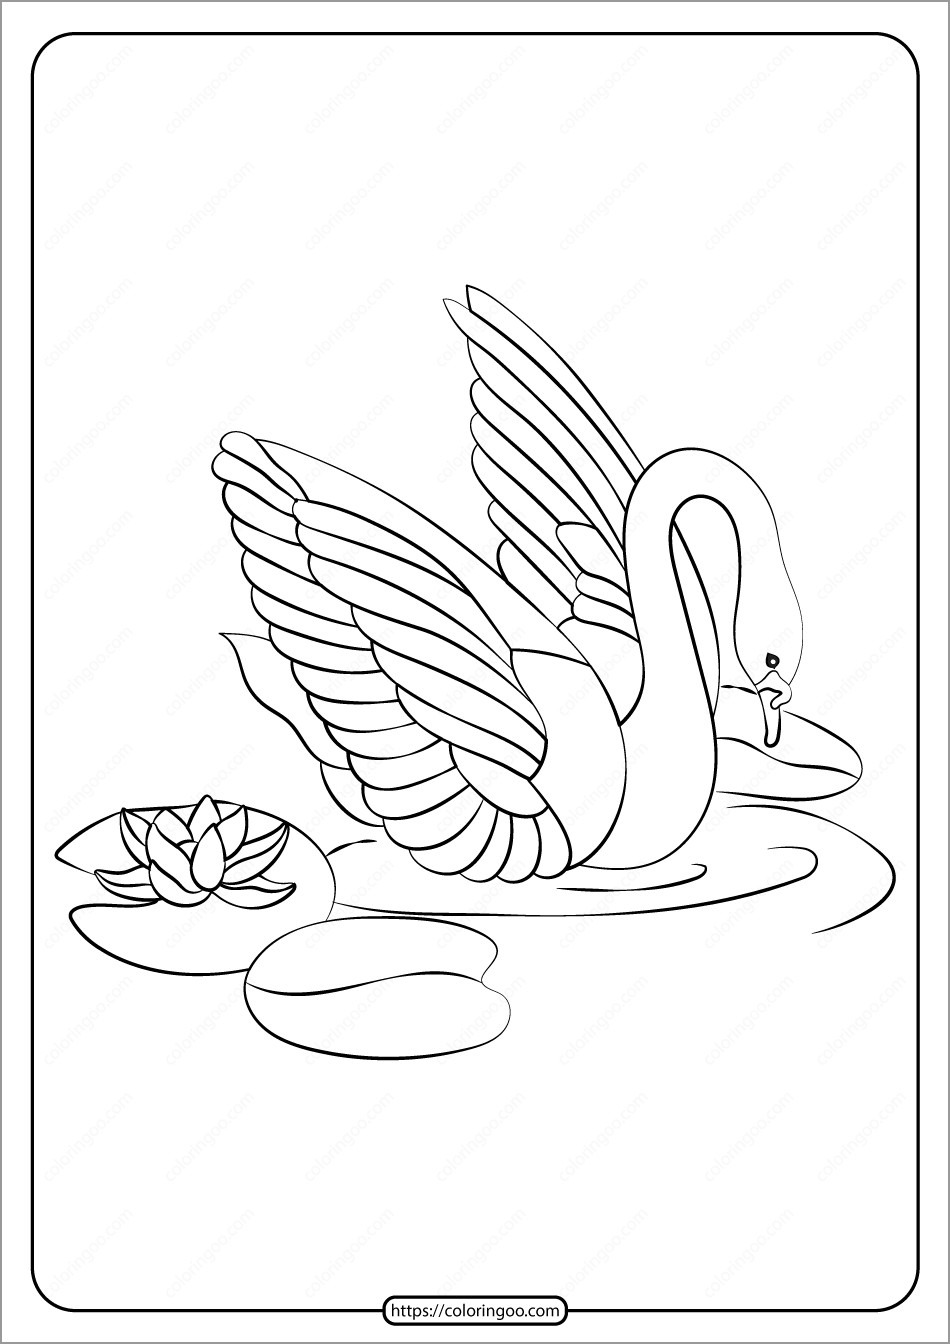 Coloring Page Of A Swan